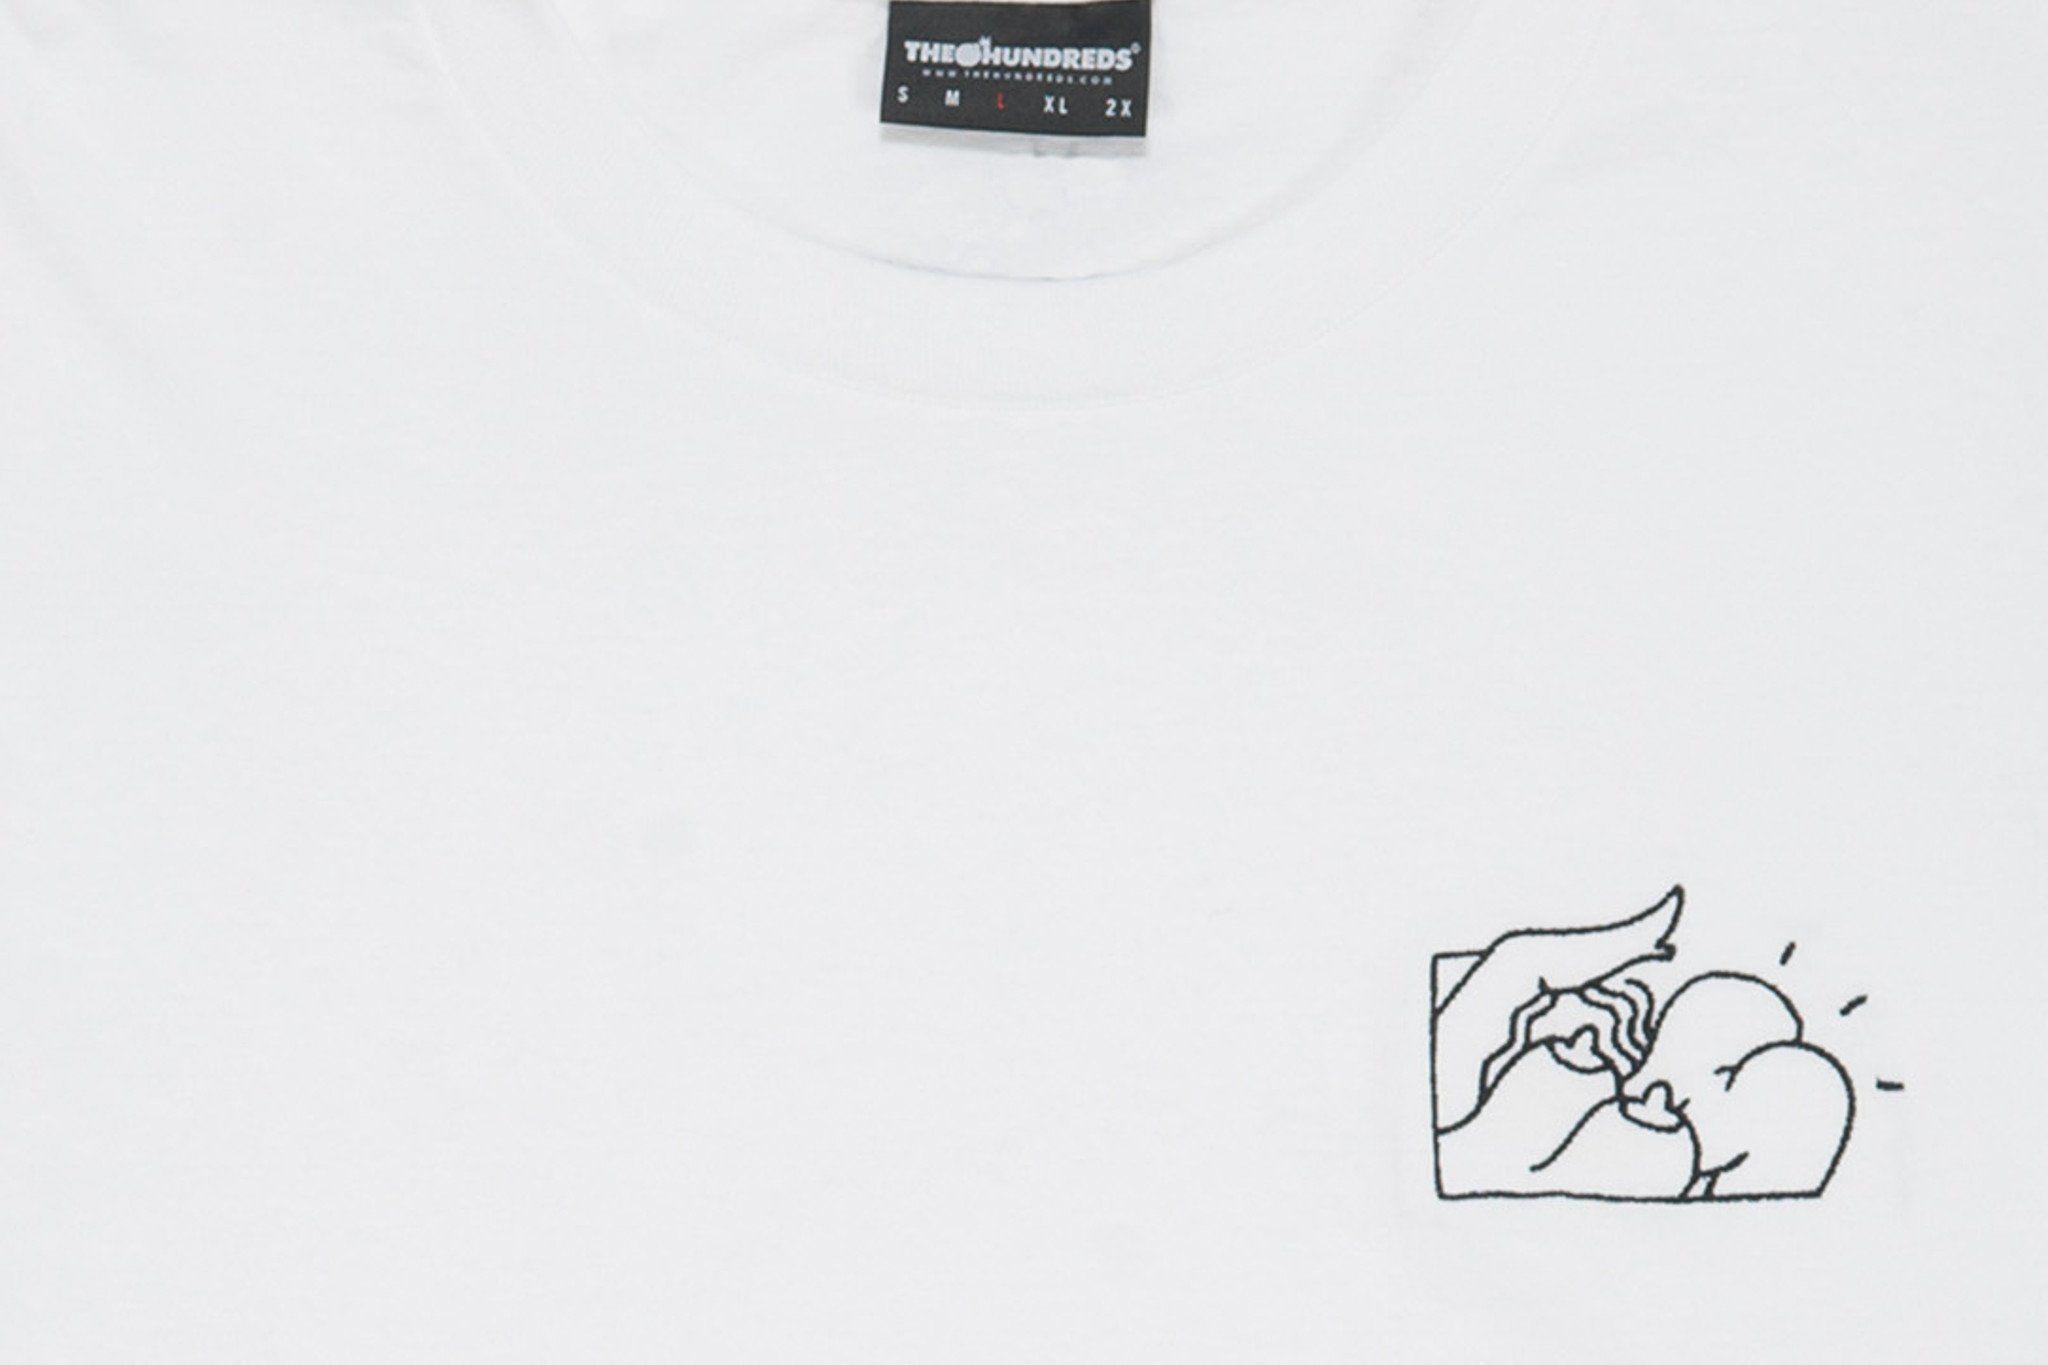 Hundreds Drawing Logo - Hypebeast drawing logo for free download on Ayoqq.org